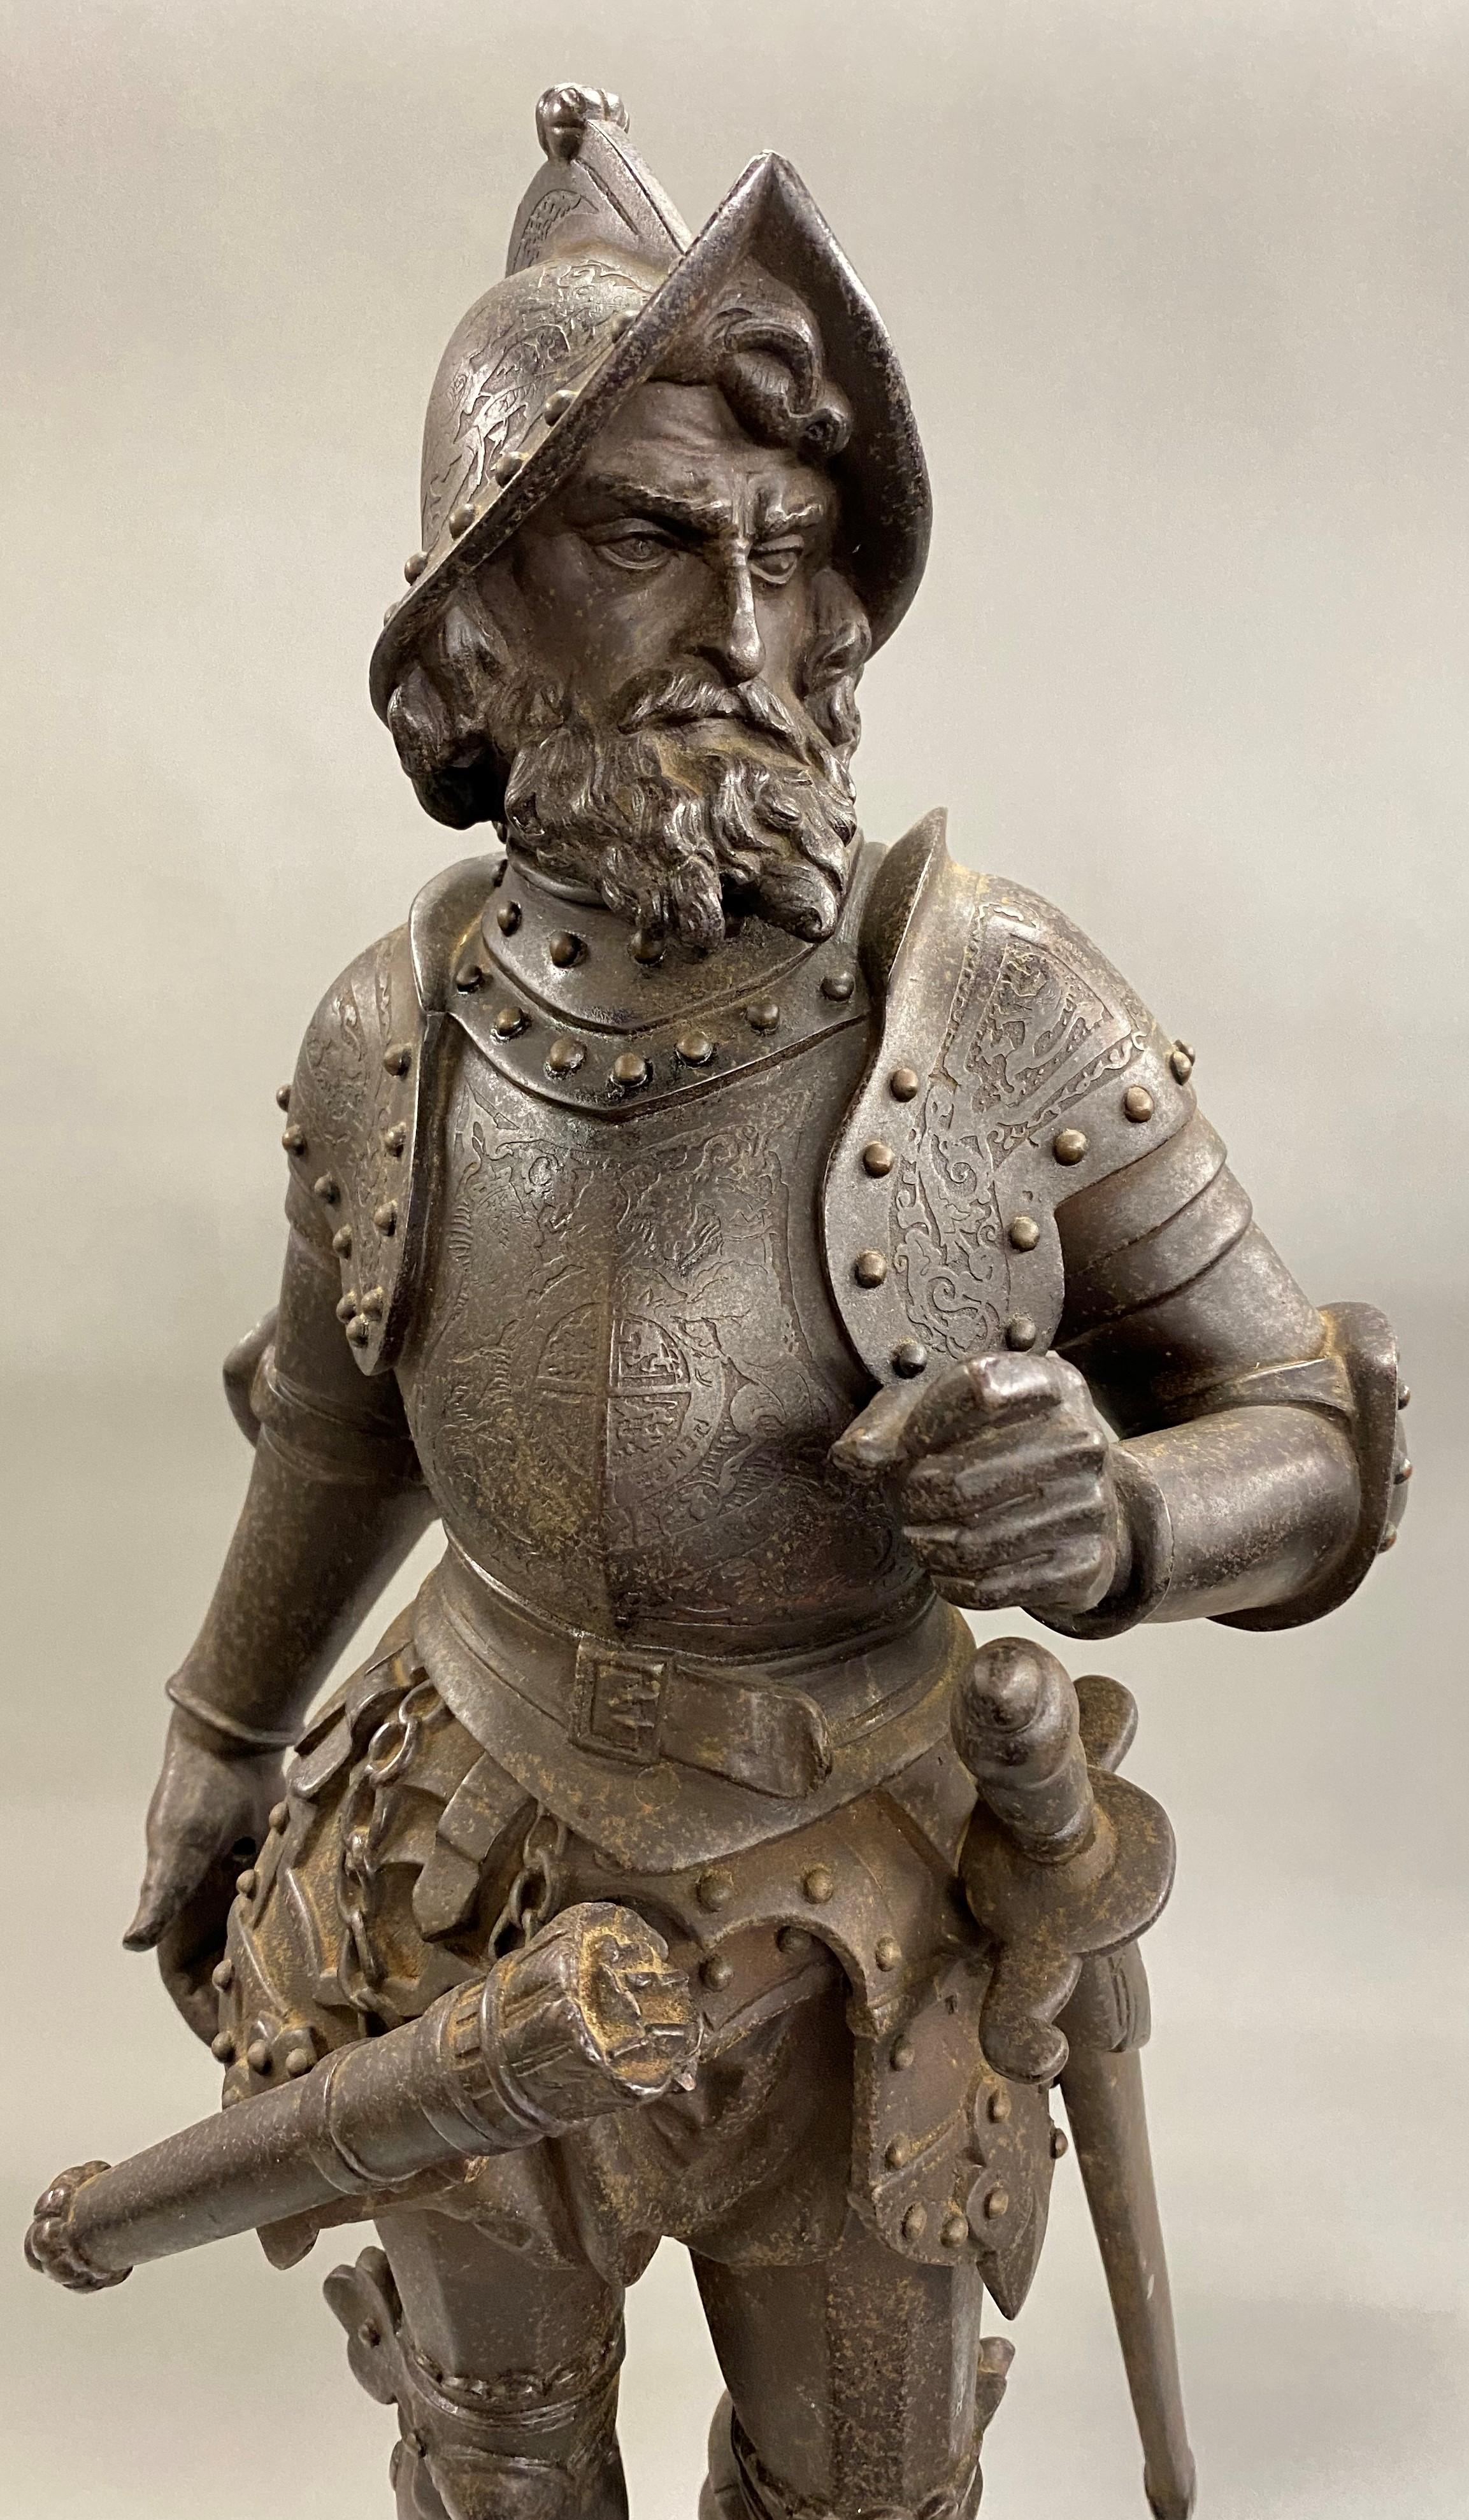 A finely detailed pair of Medieval patinated cast iron soldier statues mounted on round Majolica and cast iron reticulated bases, the left reading “Anglais 1429,” and the right reading “Francais 1429” around the base. The swords and gun are slightly